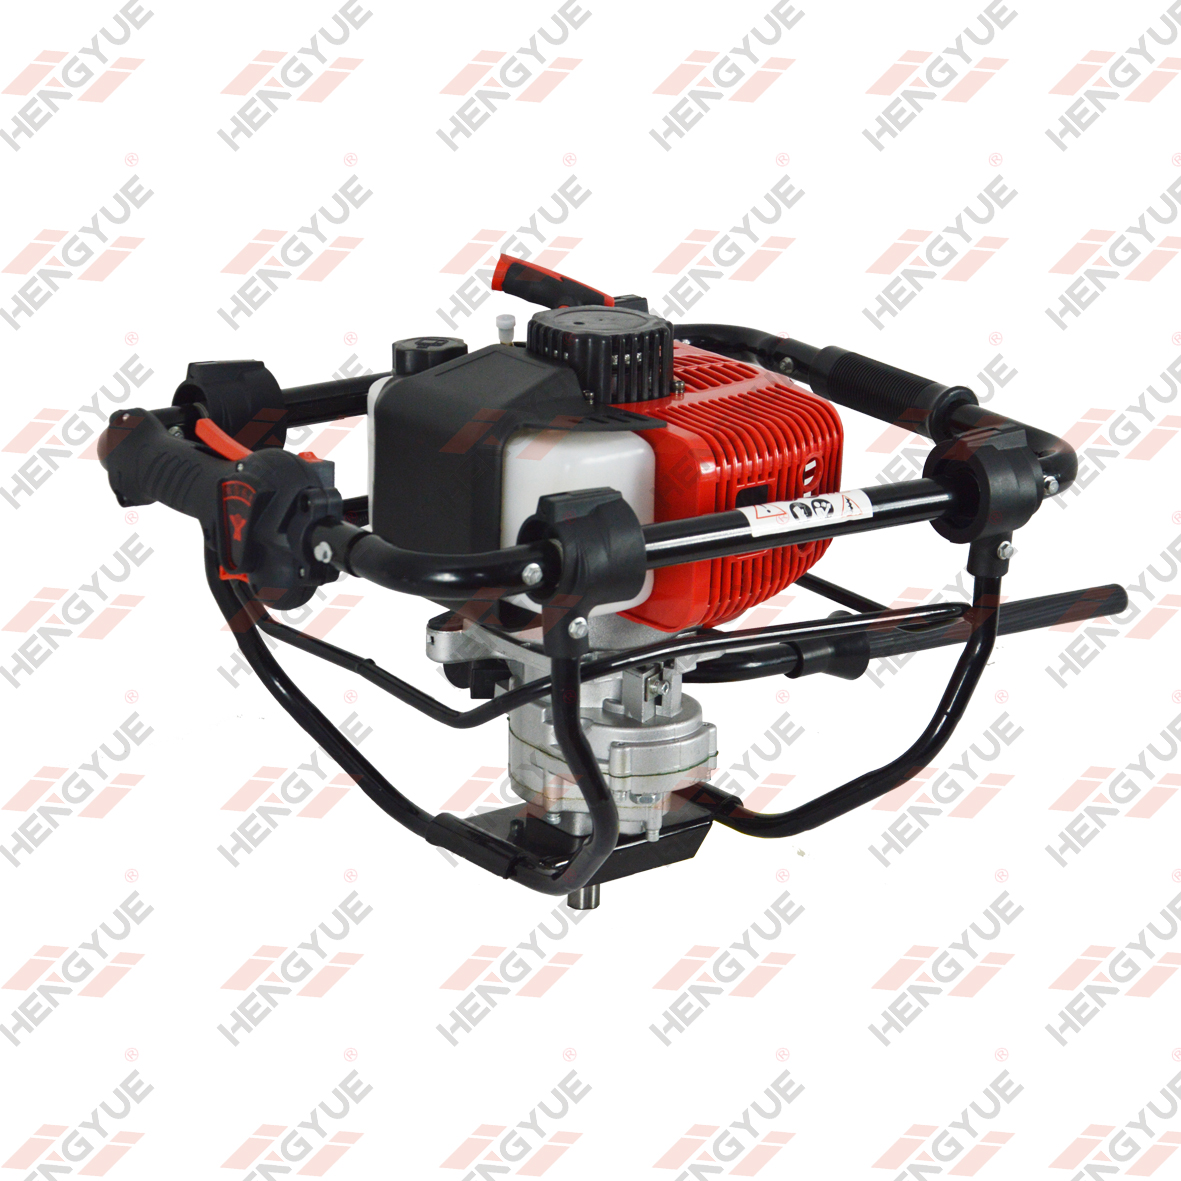 52cc Quick Stop Clutch Earth Auger 